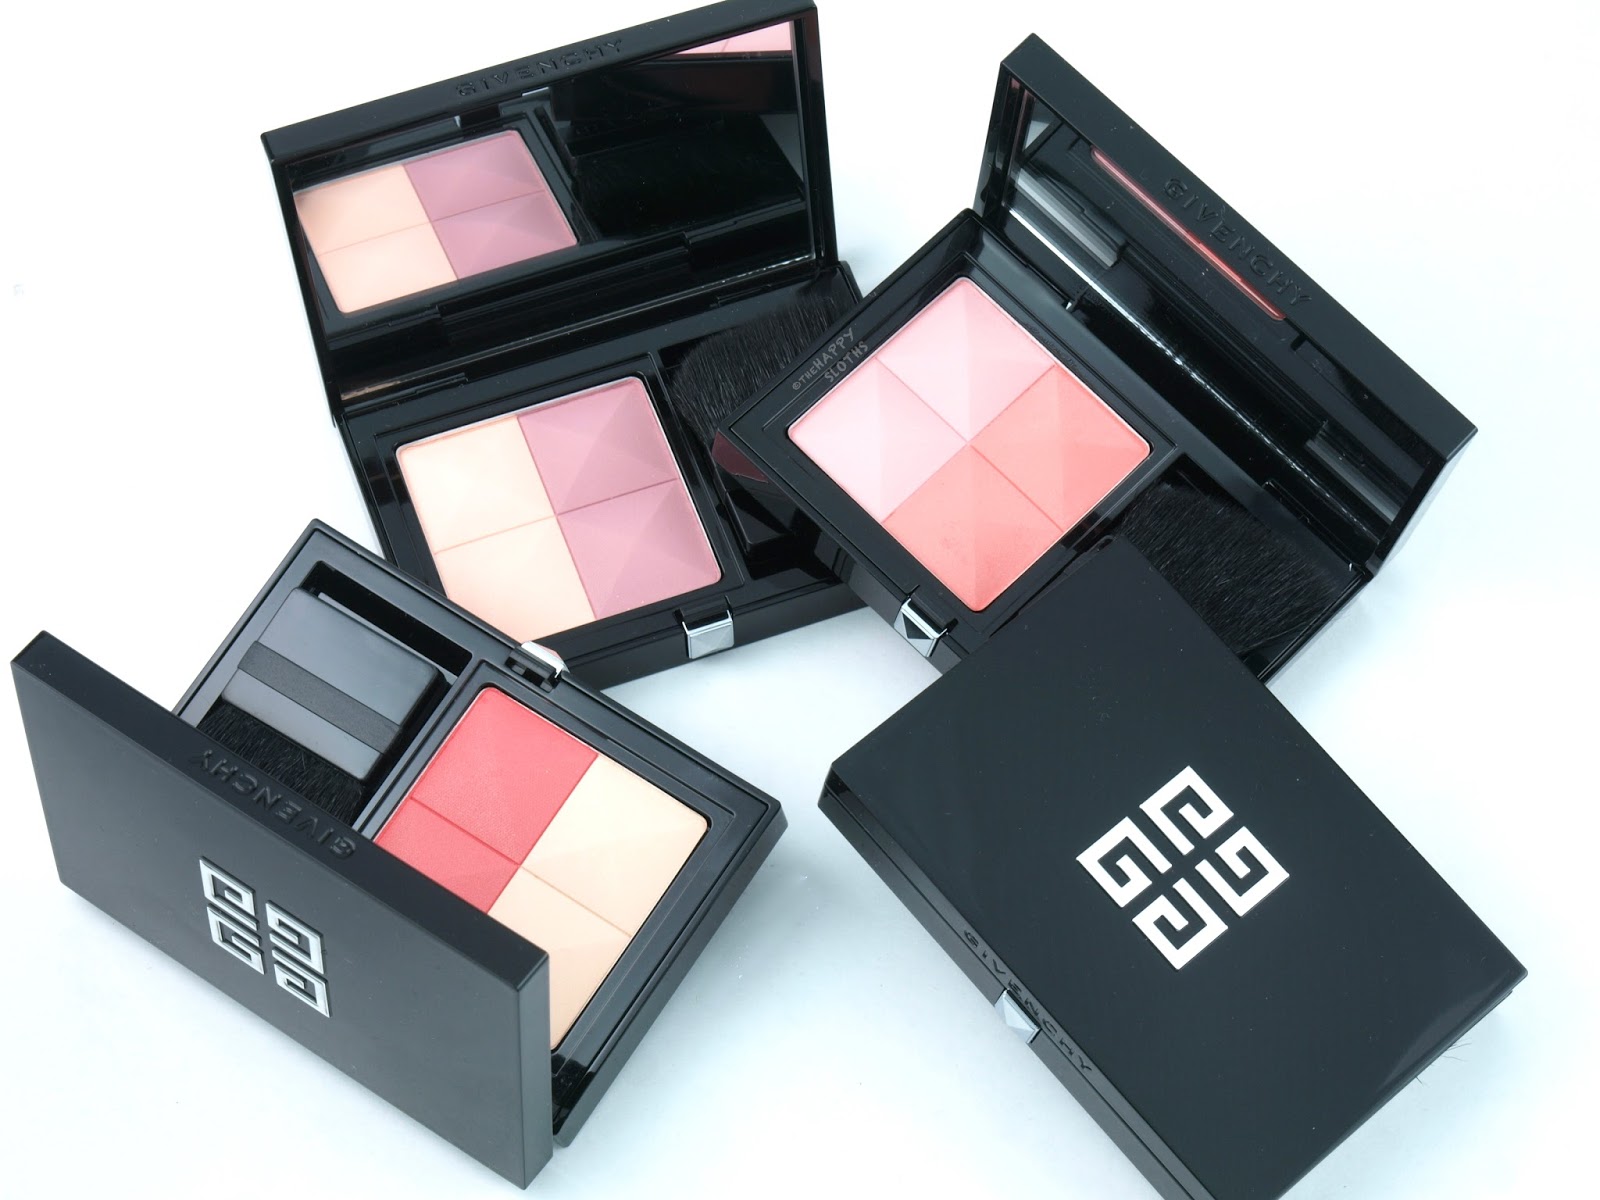 Givenchy Prisme Blush Highlight & Structure Powder Blush Duo: Review and Swatches